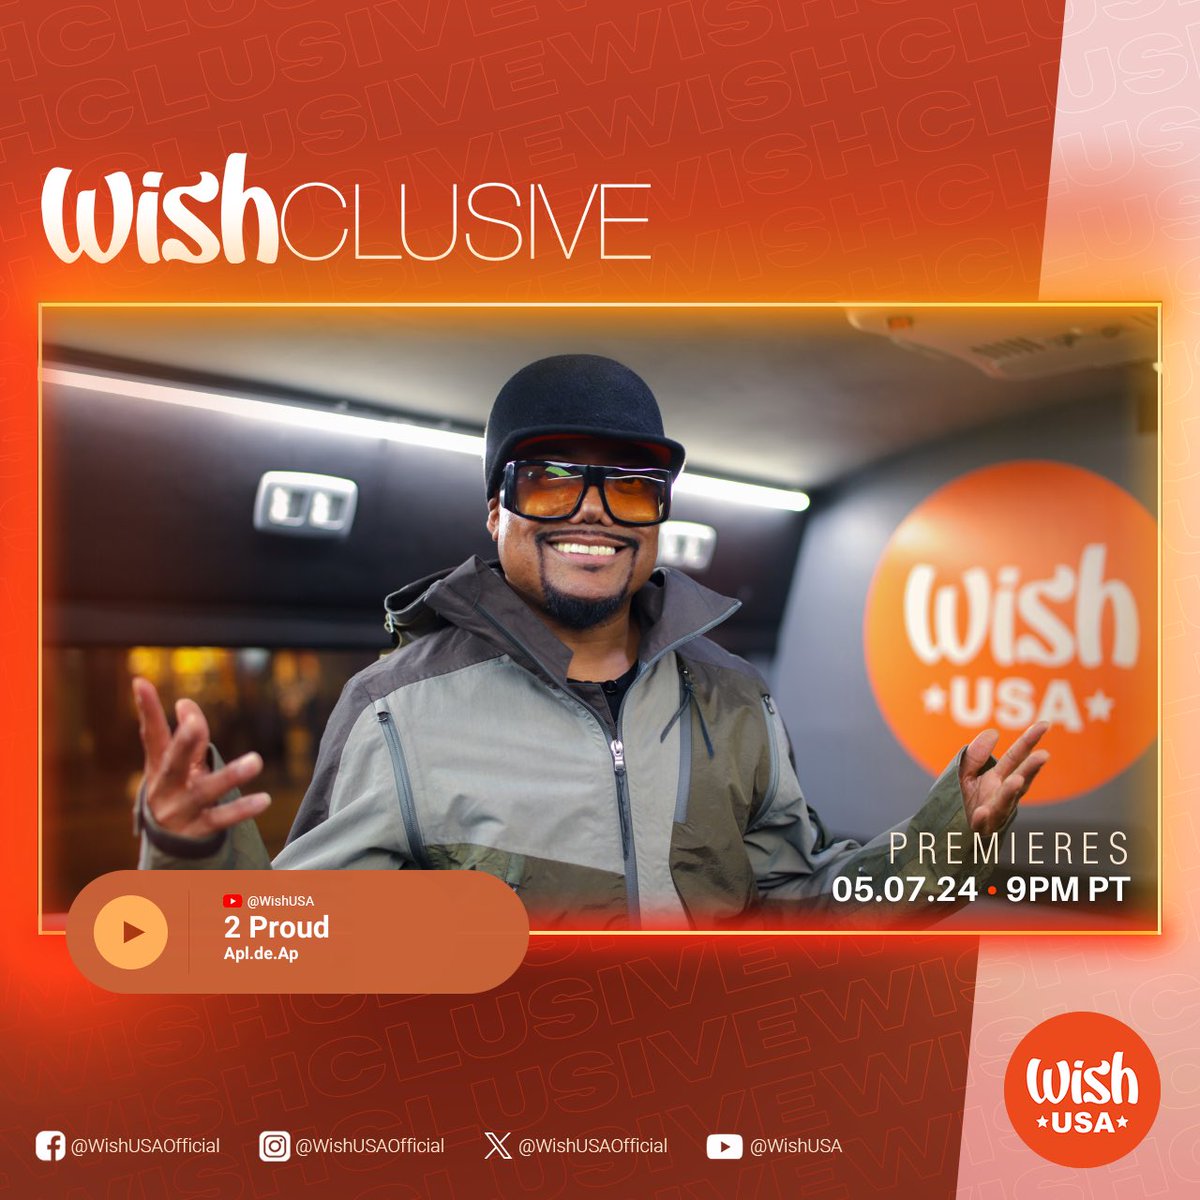 🔥All ears! Apl.de.Ap's '2 Proud' Wishclusive is coming. Love, longing, and beats that hit hard! 🎶 Save the date! 📅🚀 To watch the full Wishclusive, visit our YouTube channel at YouTube.com/@WishUSA #WishBus #Apl.de.Ap #2Proud #Wishclusive #MusicCollab